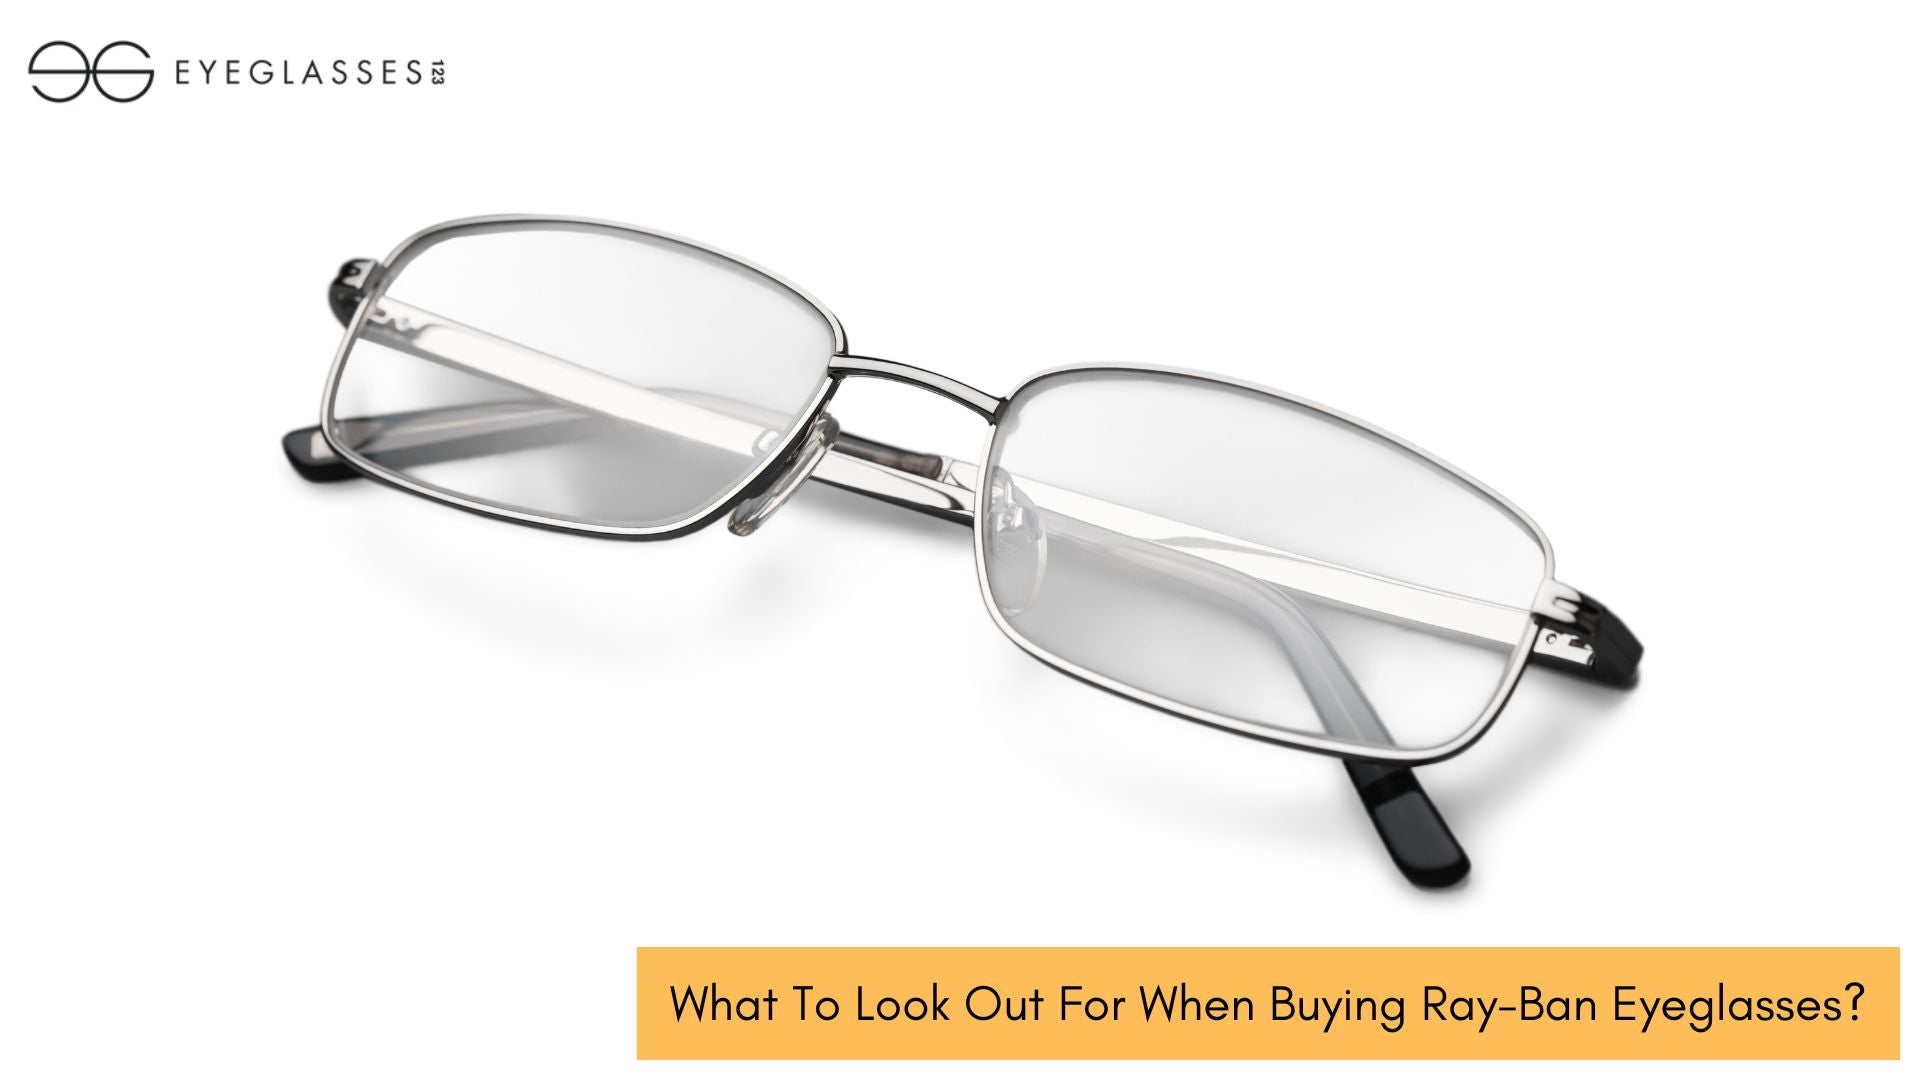 What To Look Out For When Buying Ray-Ban Eyeglasses?